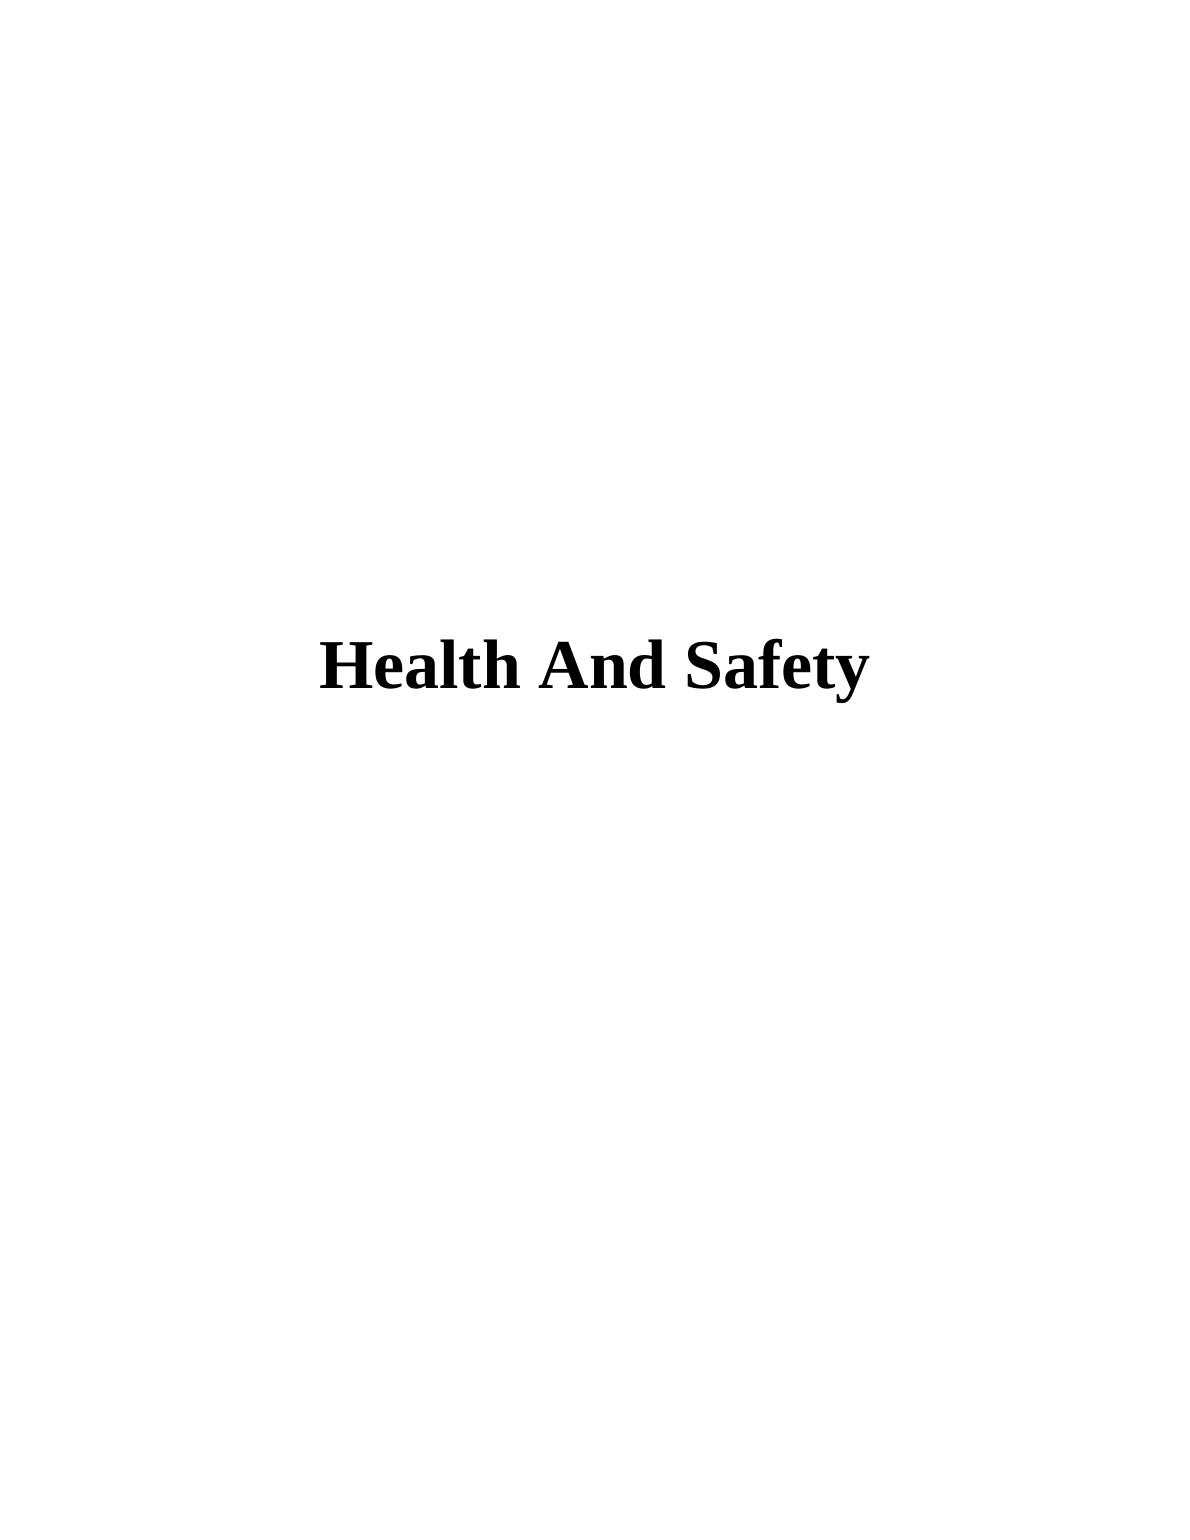 Health and Safety INTRODUCTION_1